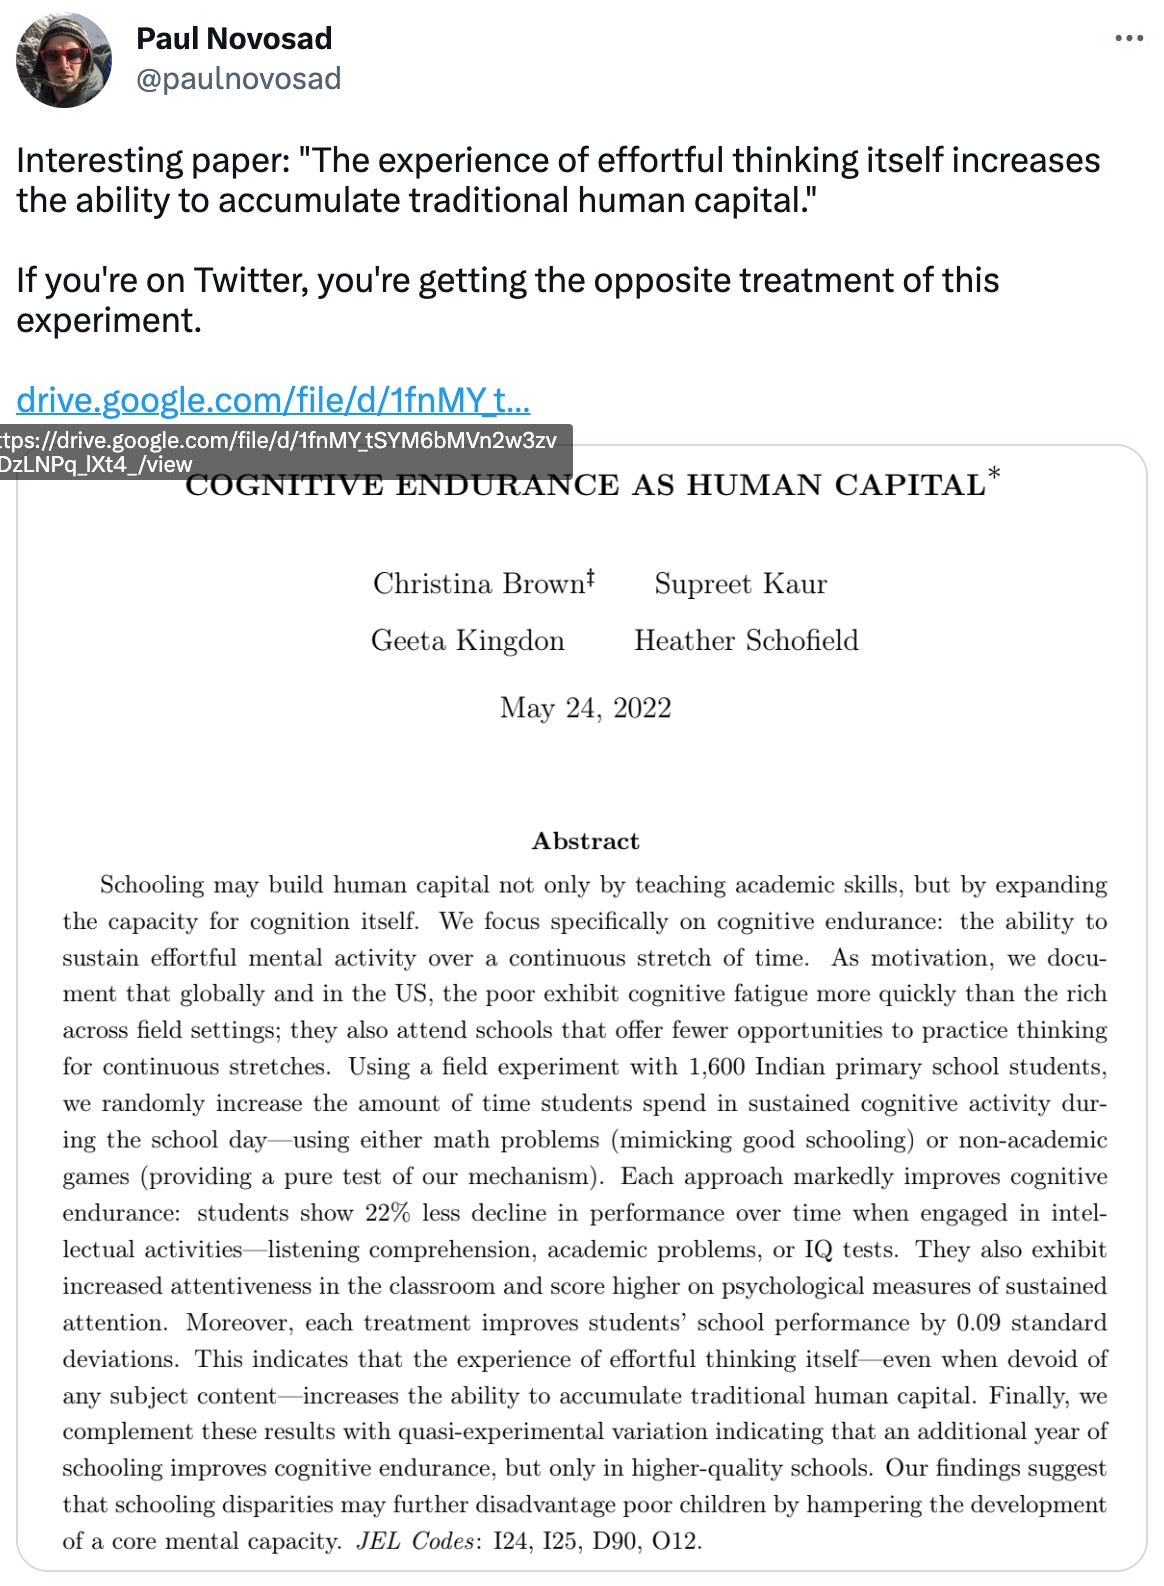  Paul Novosad @paulnovosad Interesting paper: "The experience of effortful thinking itself increases the ability to accumulate traditional human capital."  If you're on Twitter, you're getting the opposite treatment of this experiment.  https://drive.google.com/file/d/1fnMY_tSYM6bMVn2w3zvCDzLNPq_lXt4_/view